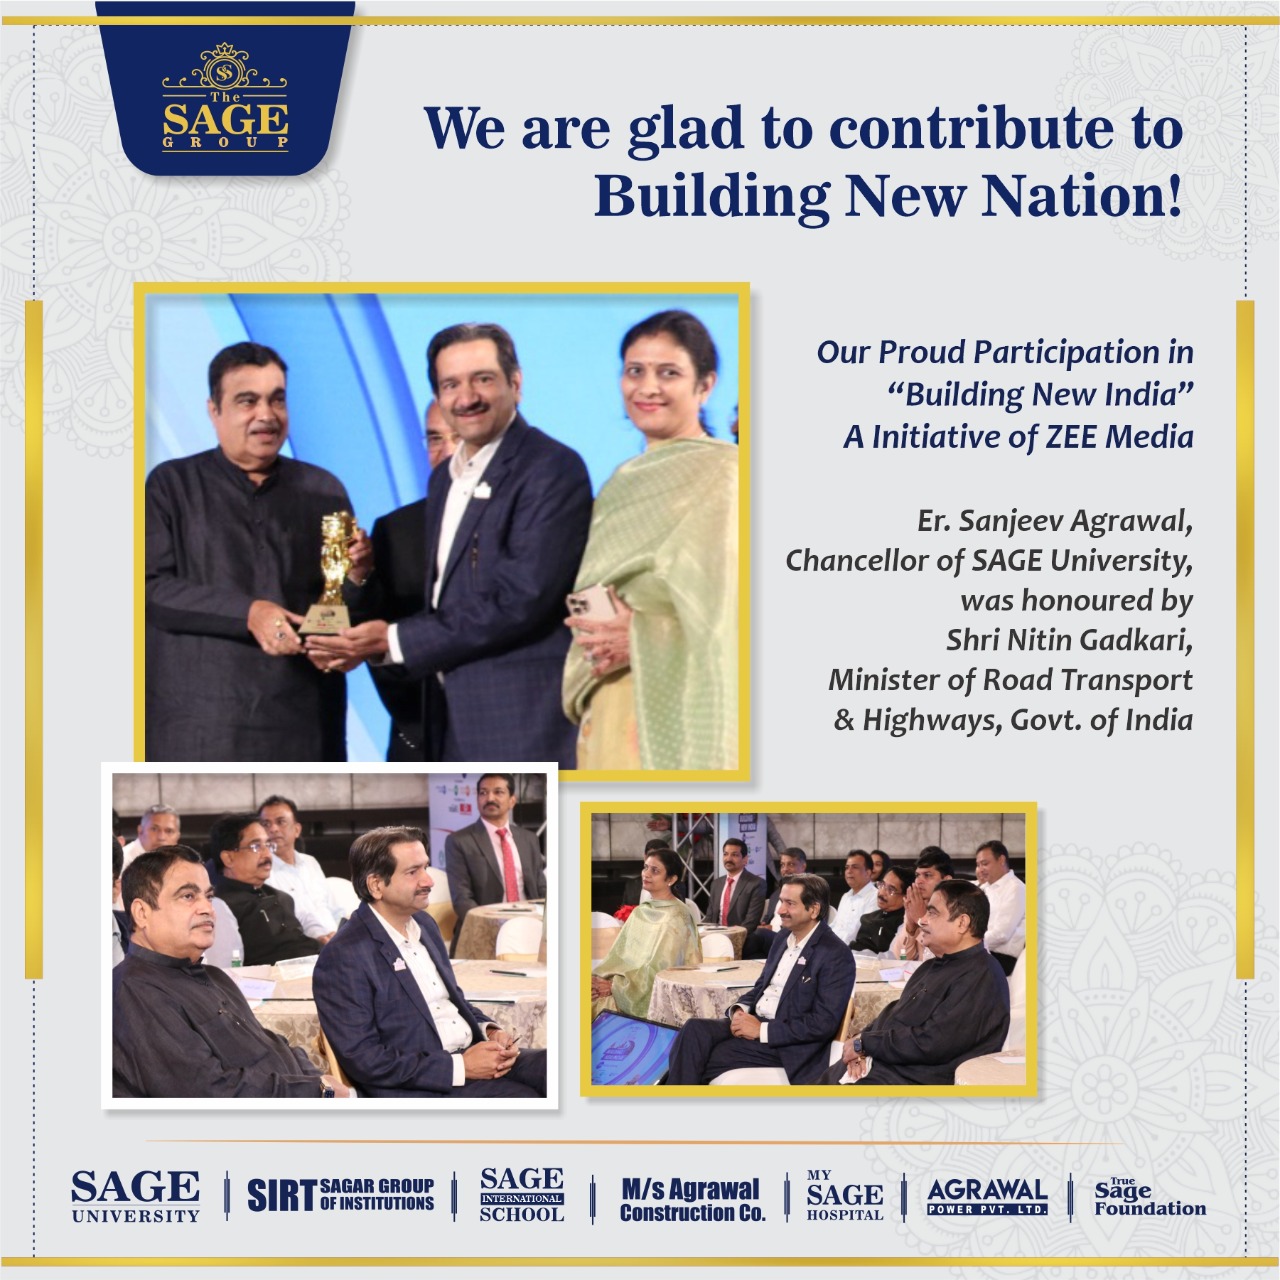 Building New India - A Initiative of ZEE Media                                                              
                                                            